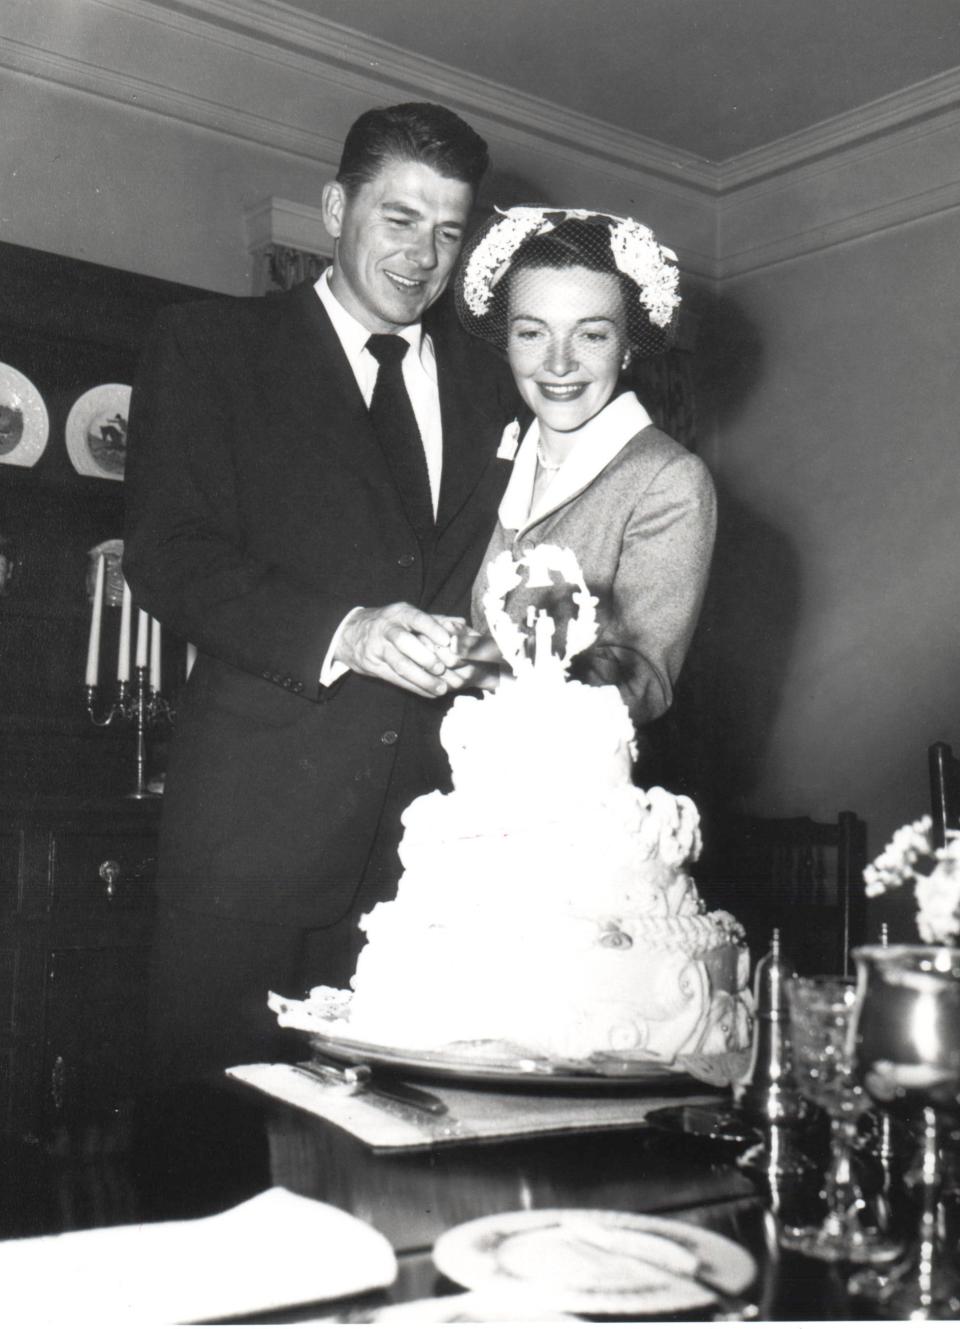 Ronald and Nancy Reagan cut their wedding cake together.